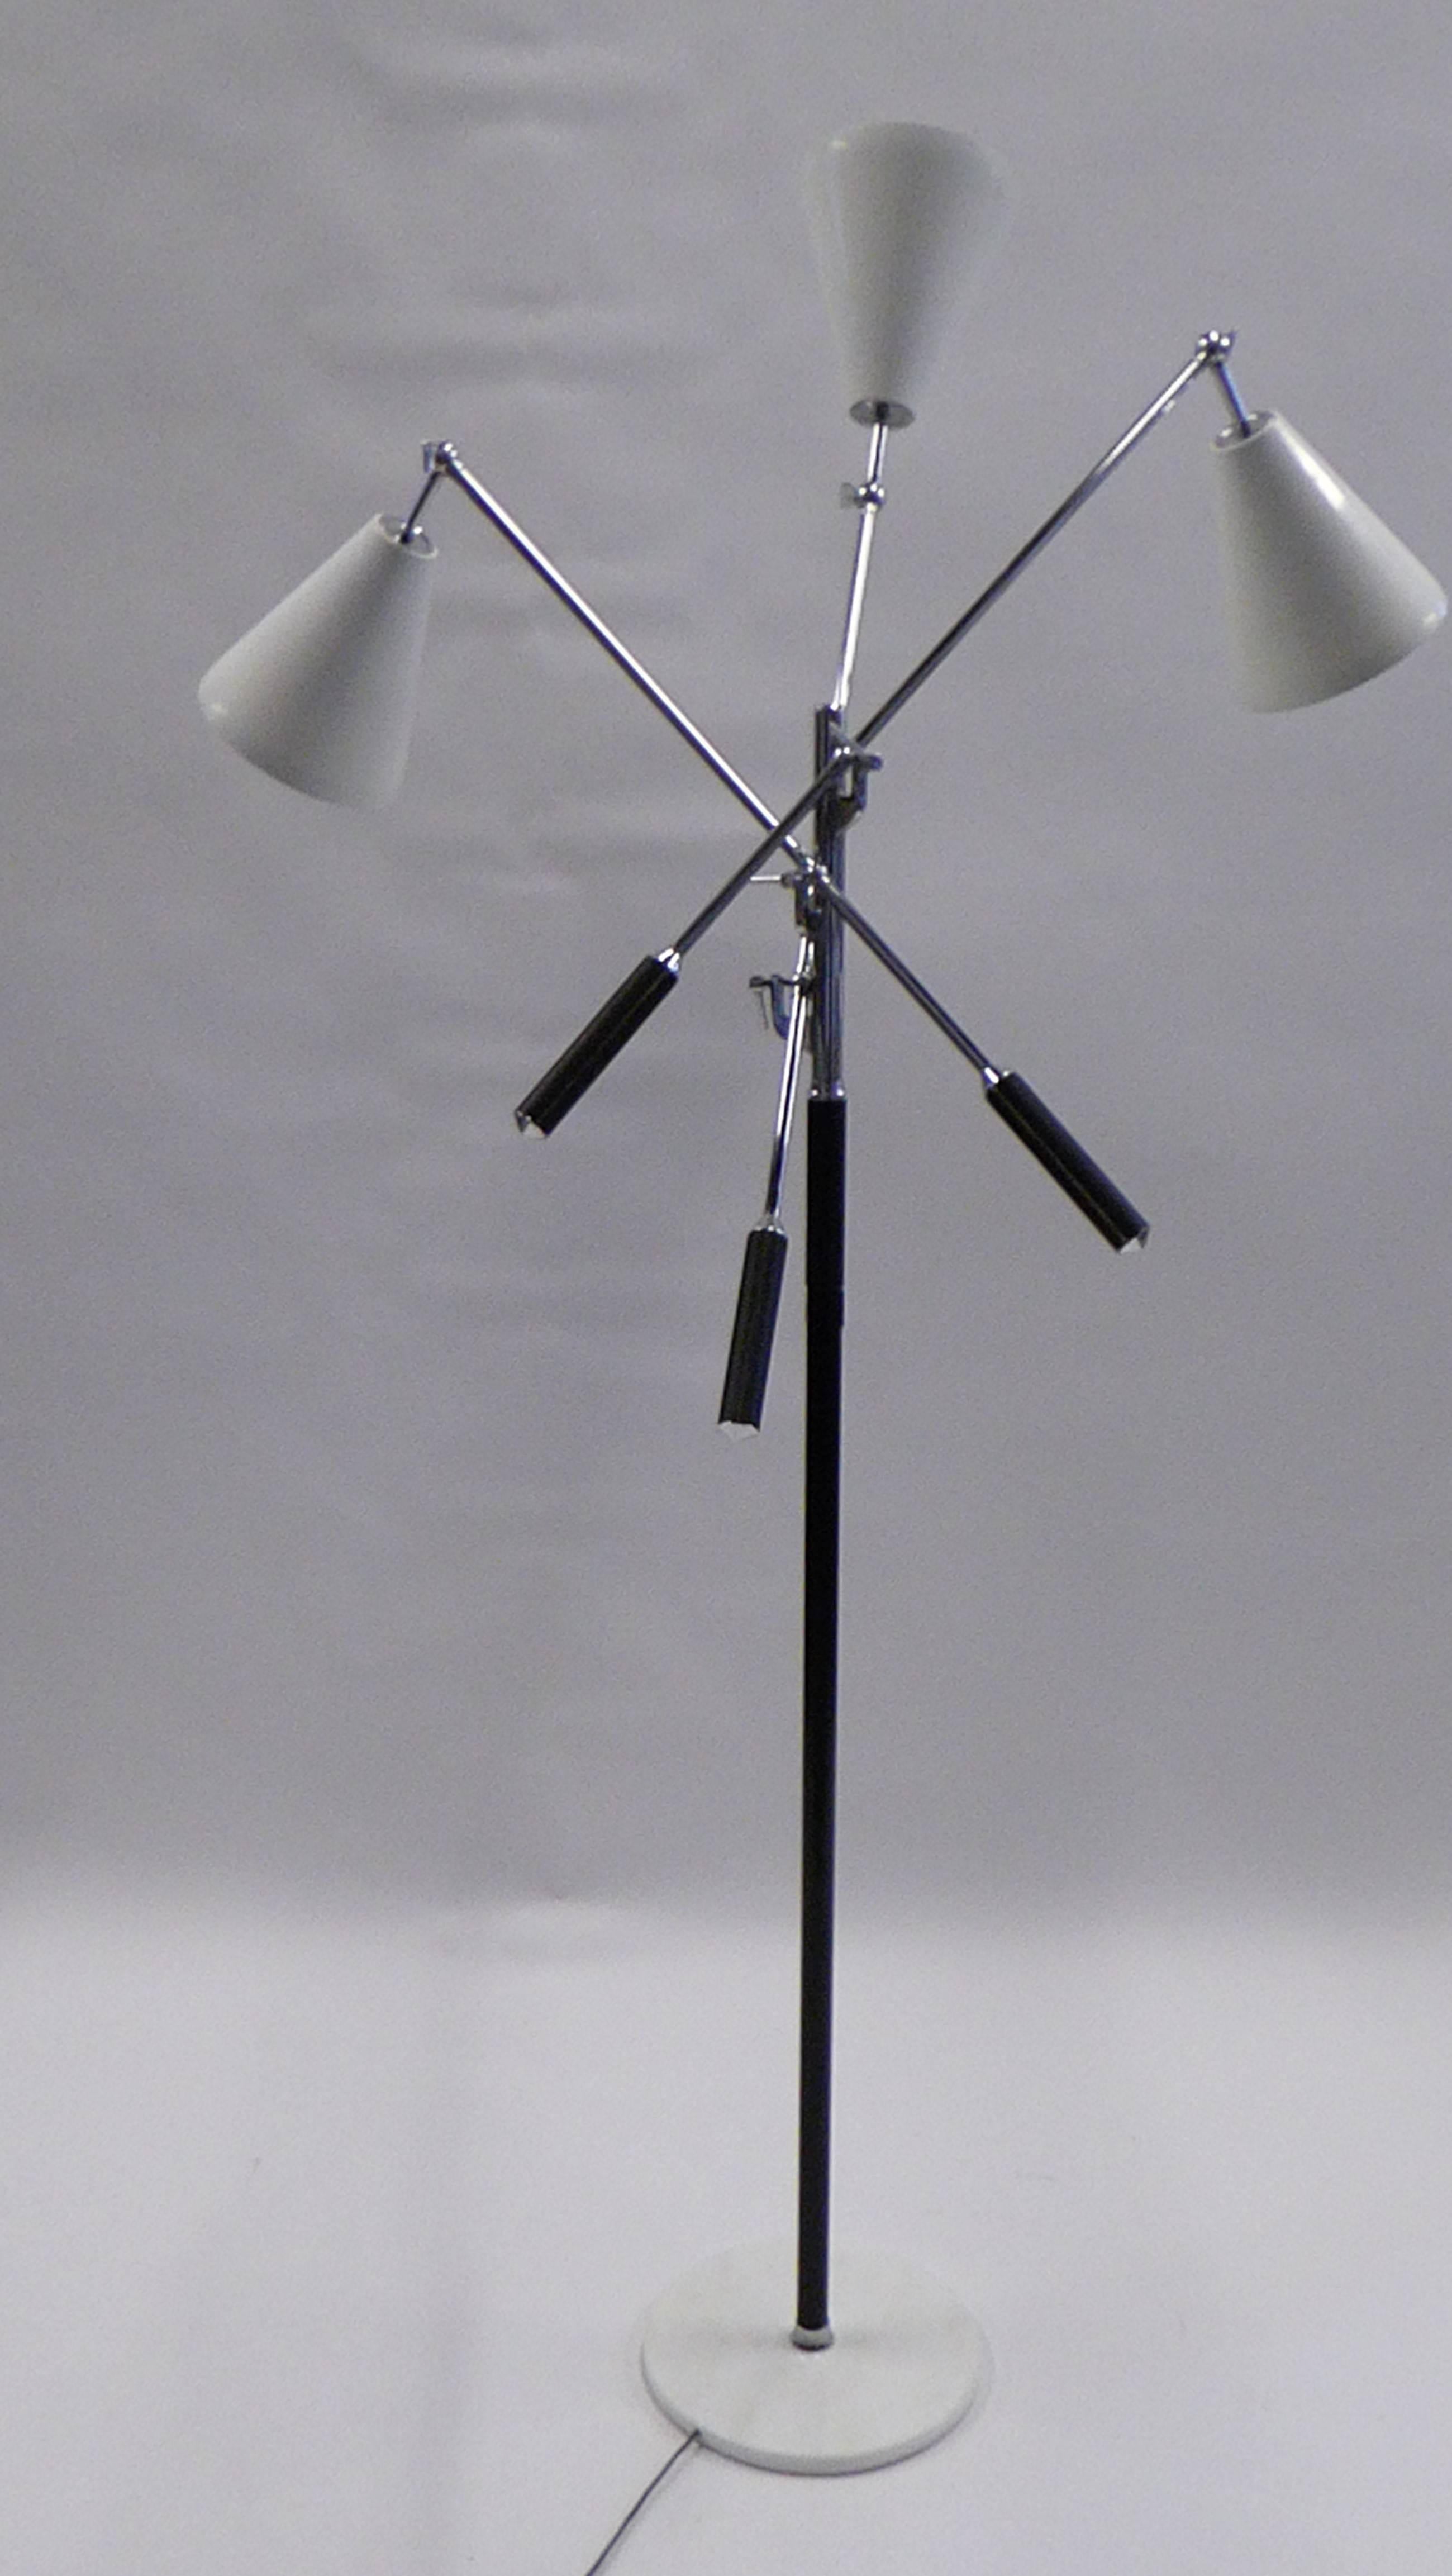 REDUCED FRO $10,000.
Designed in the style of Angelo Lelli for Arredoluce, the iconic Triennale articulating arms floor lamp. Carrara marble base, nickel chrome, three cream white shades and leather wrapped handles and pole center. Quite adjustable.